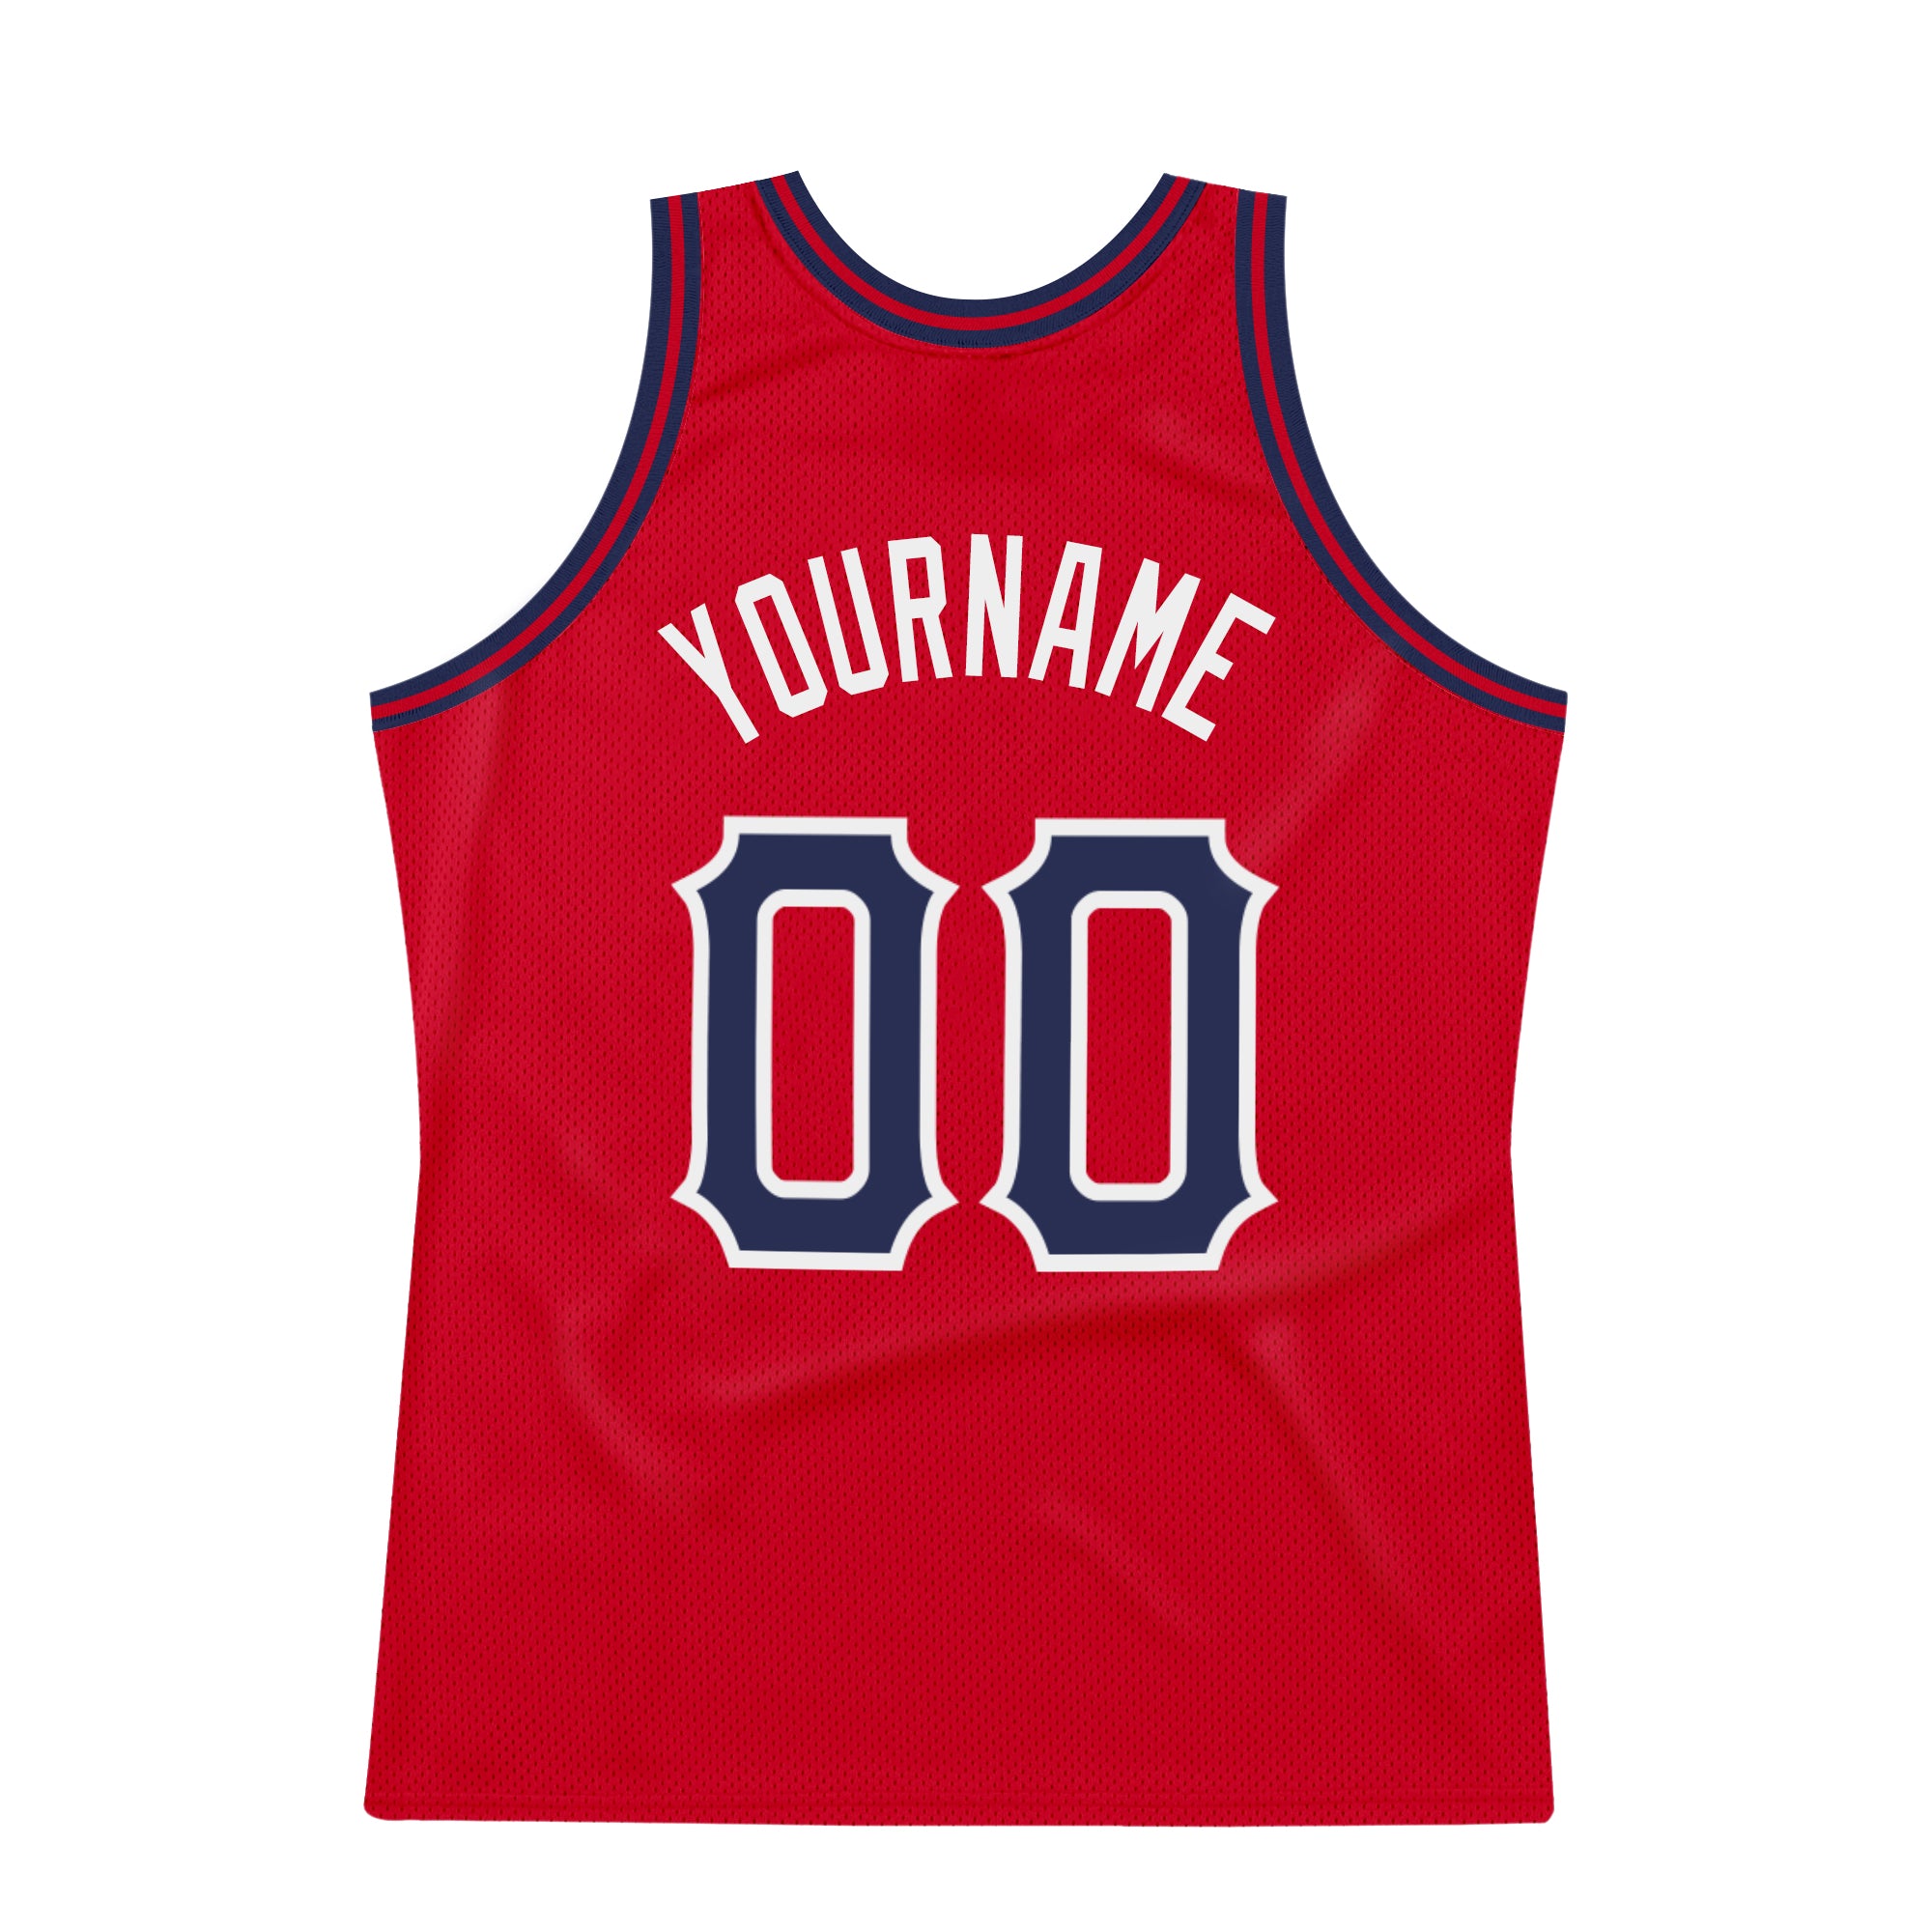 Cheap Custom Navy Red-White Authentic Throwback Basketball Jersey